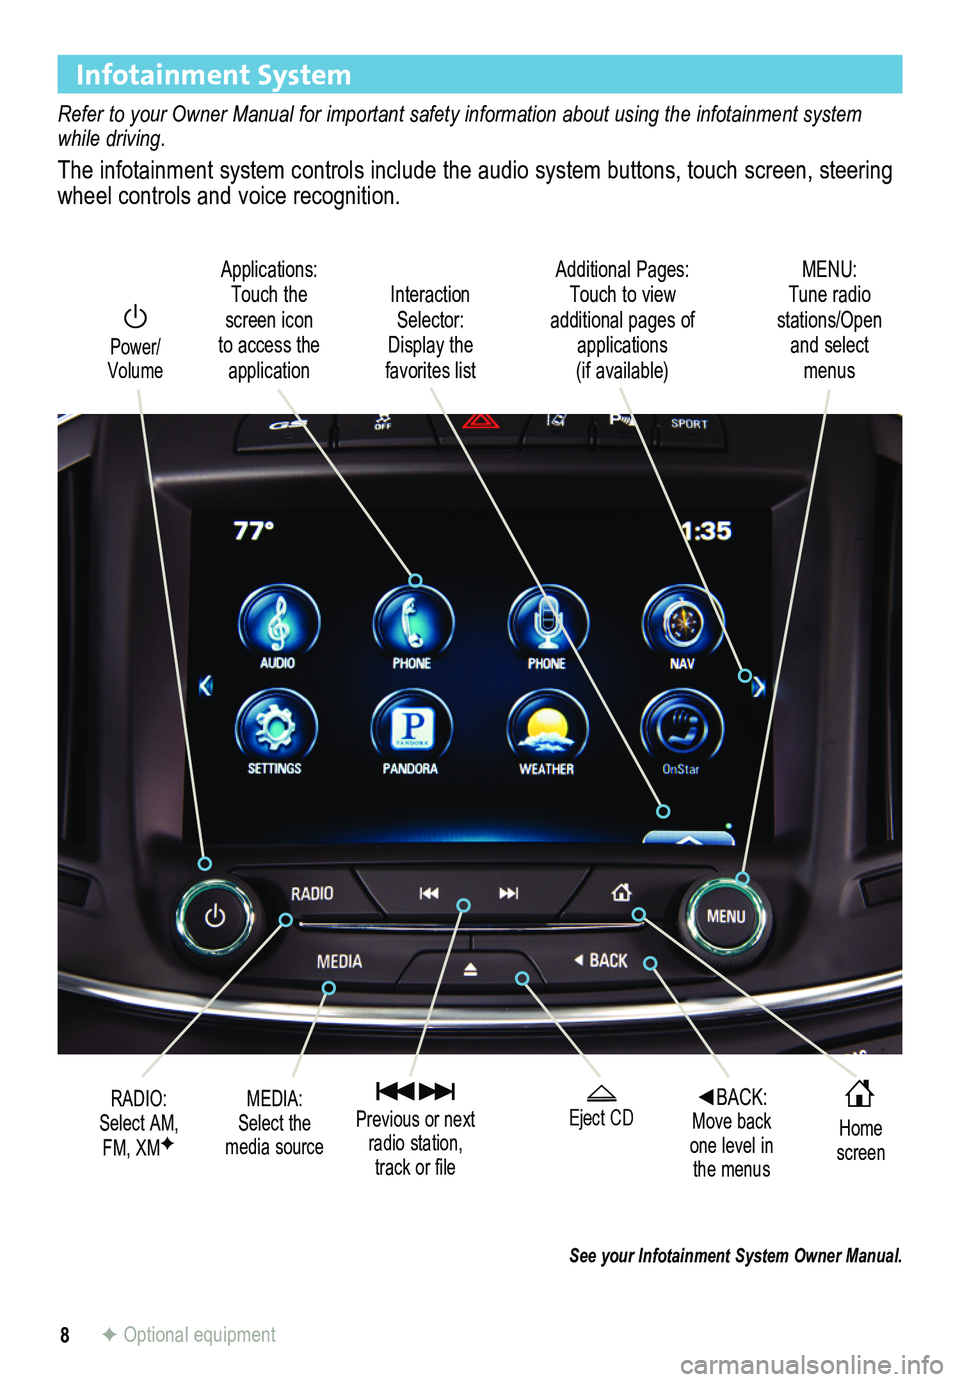 BUICK REGAL 2014  Get To Know Guide 8
Infotainment System
Refer to your Owner Manual for important safety information about using \
the infotainment system while driving.
The infotainment system controls include the audio system buttons